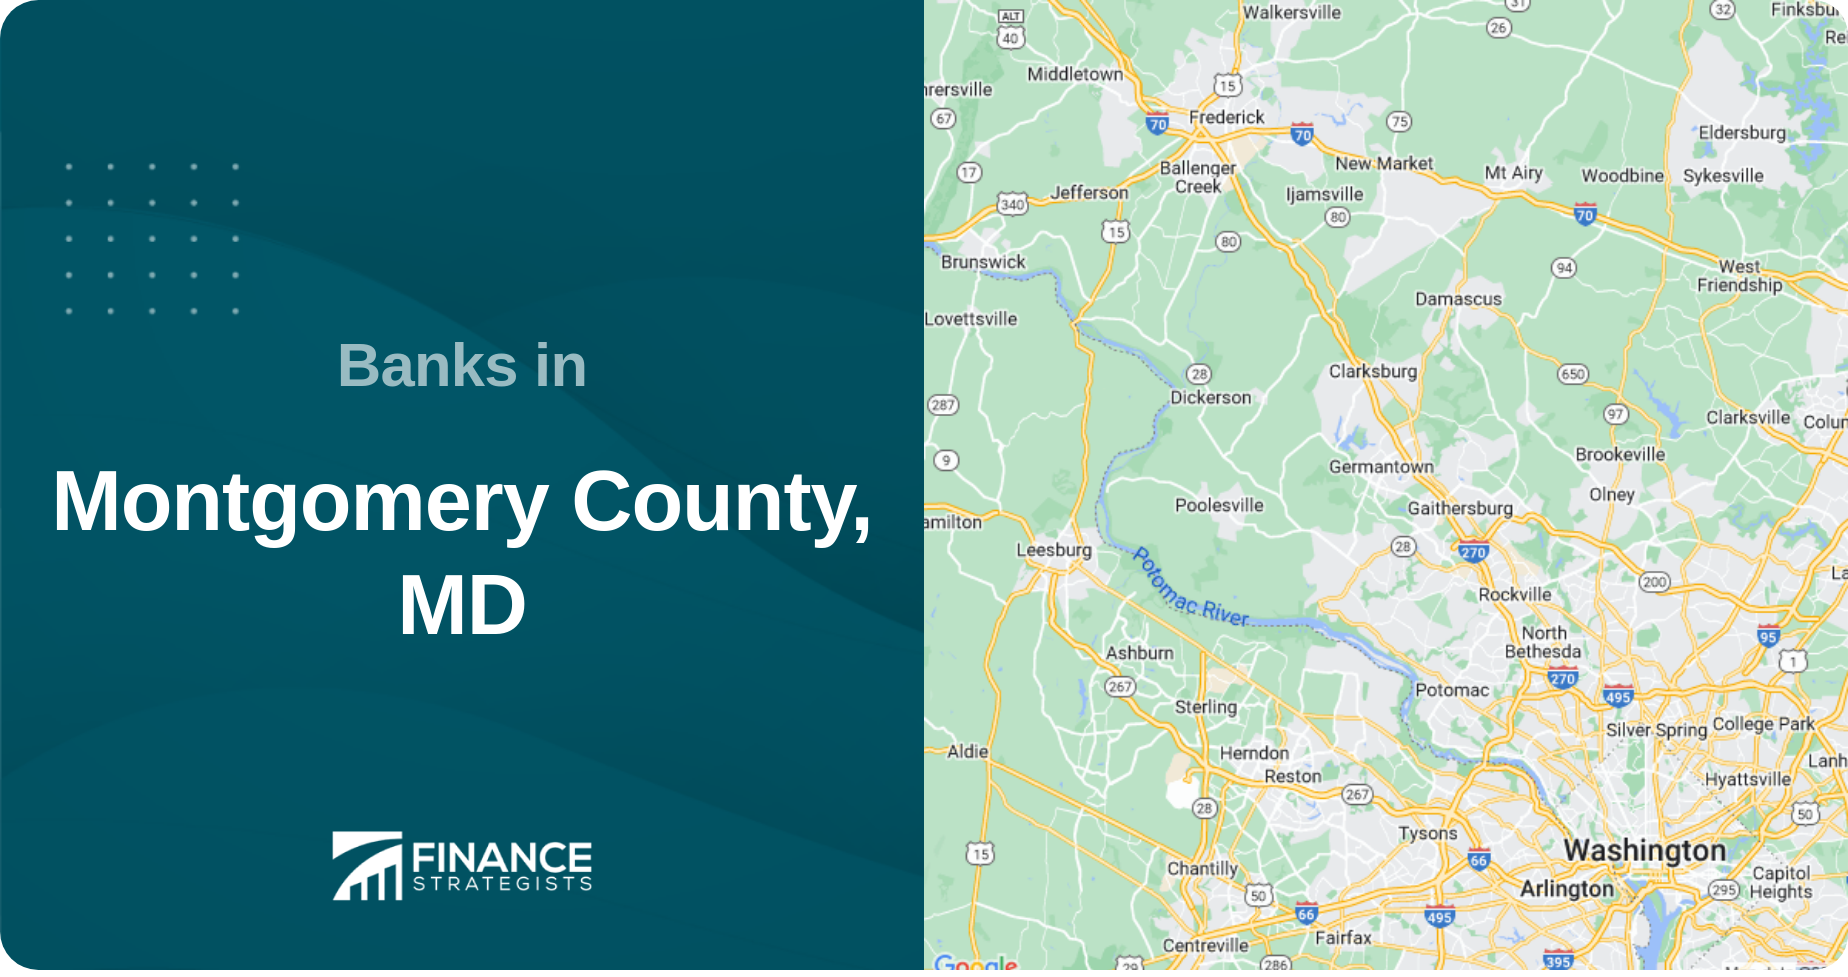 Banks in Montgomery County, MD